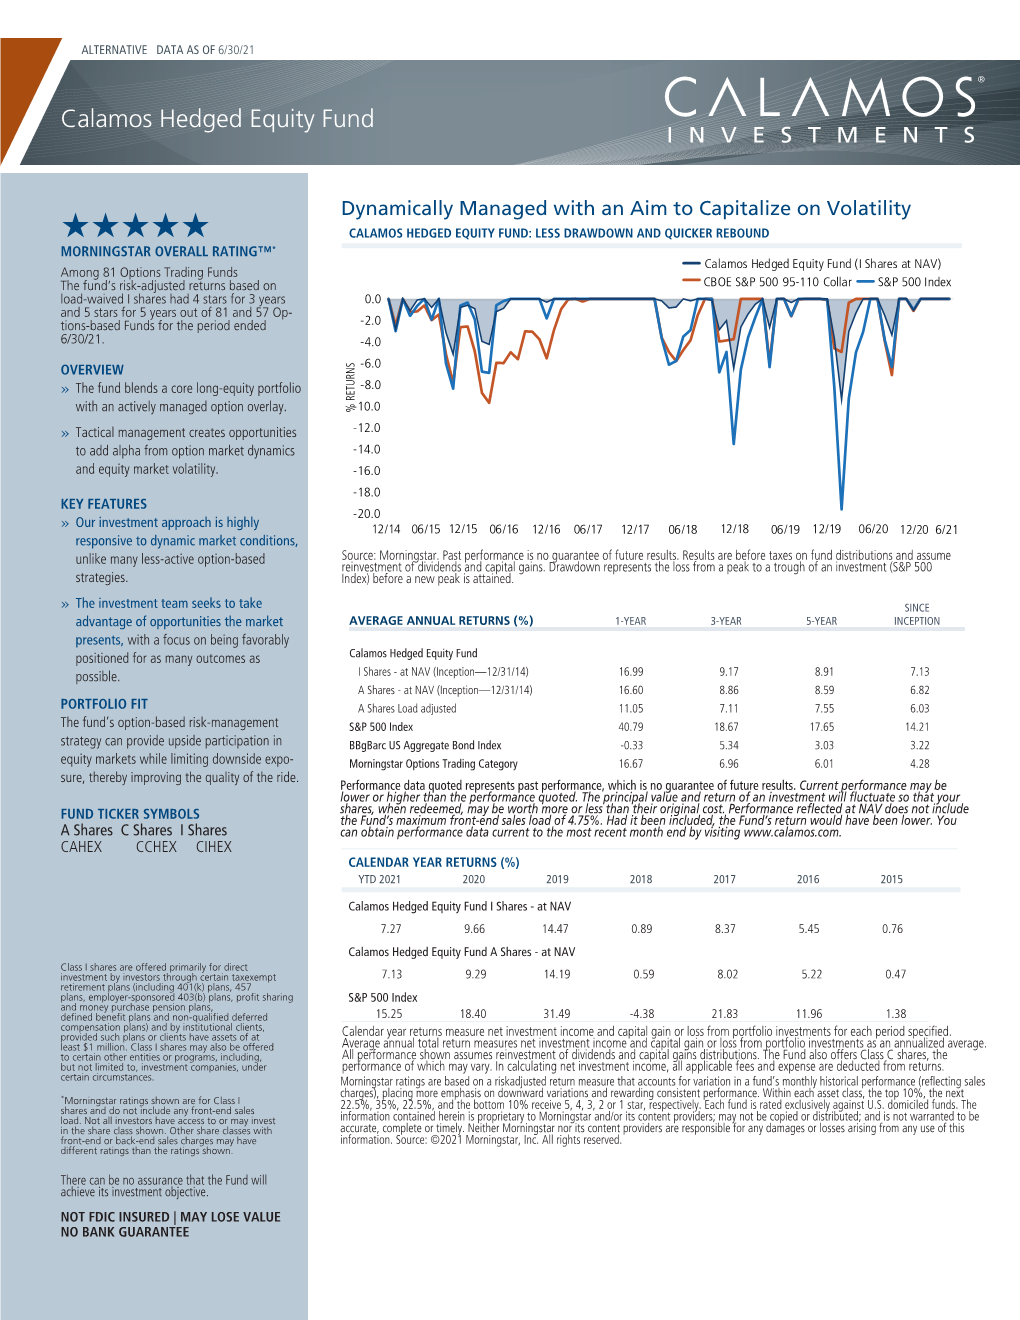 Calamos Hedged Equity Fund Fact Sheet